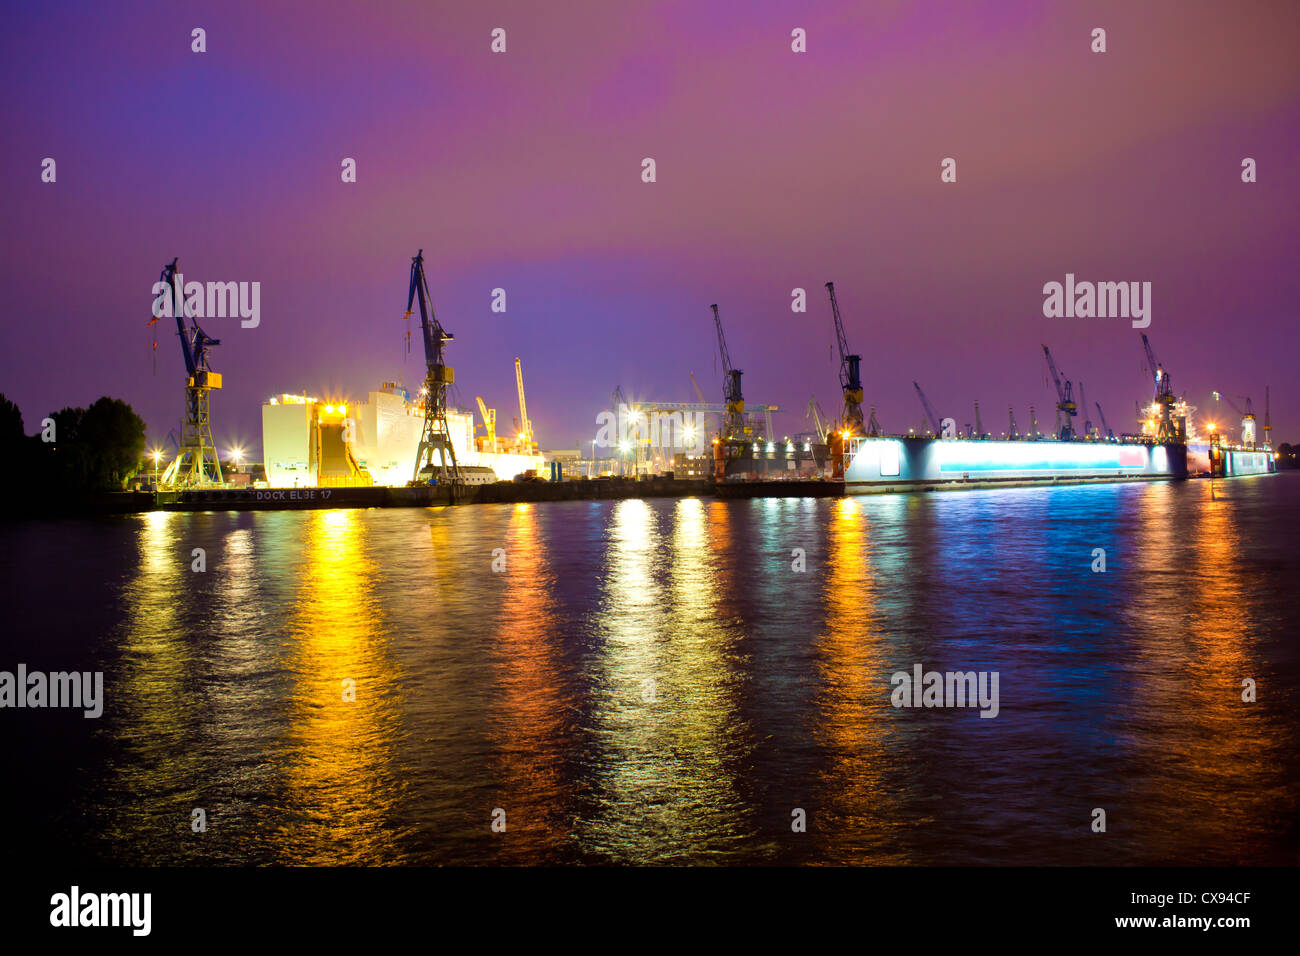 Sea or river port in night time Stock Photo